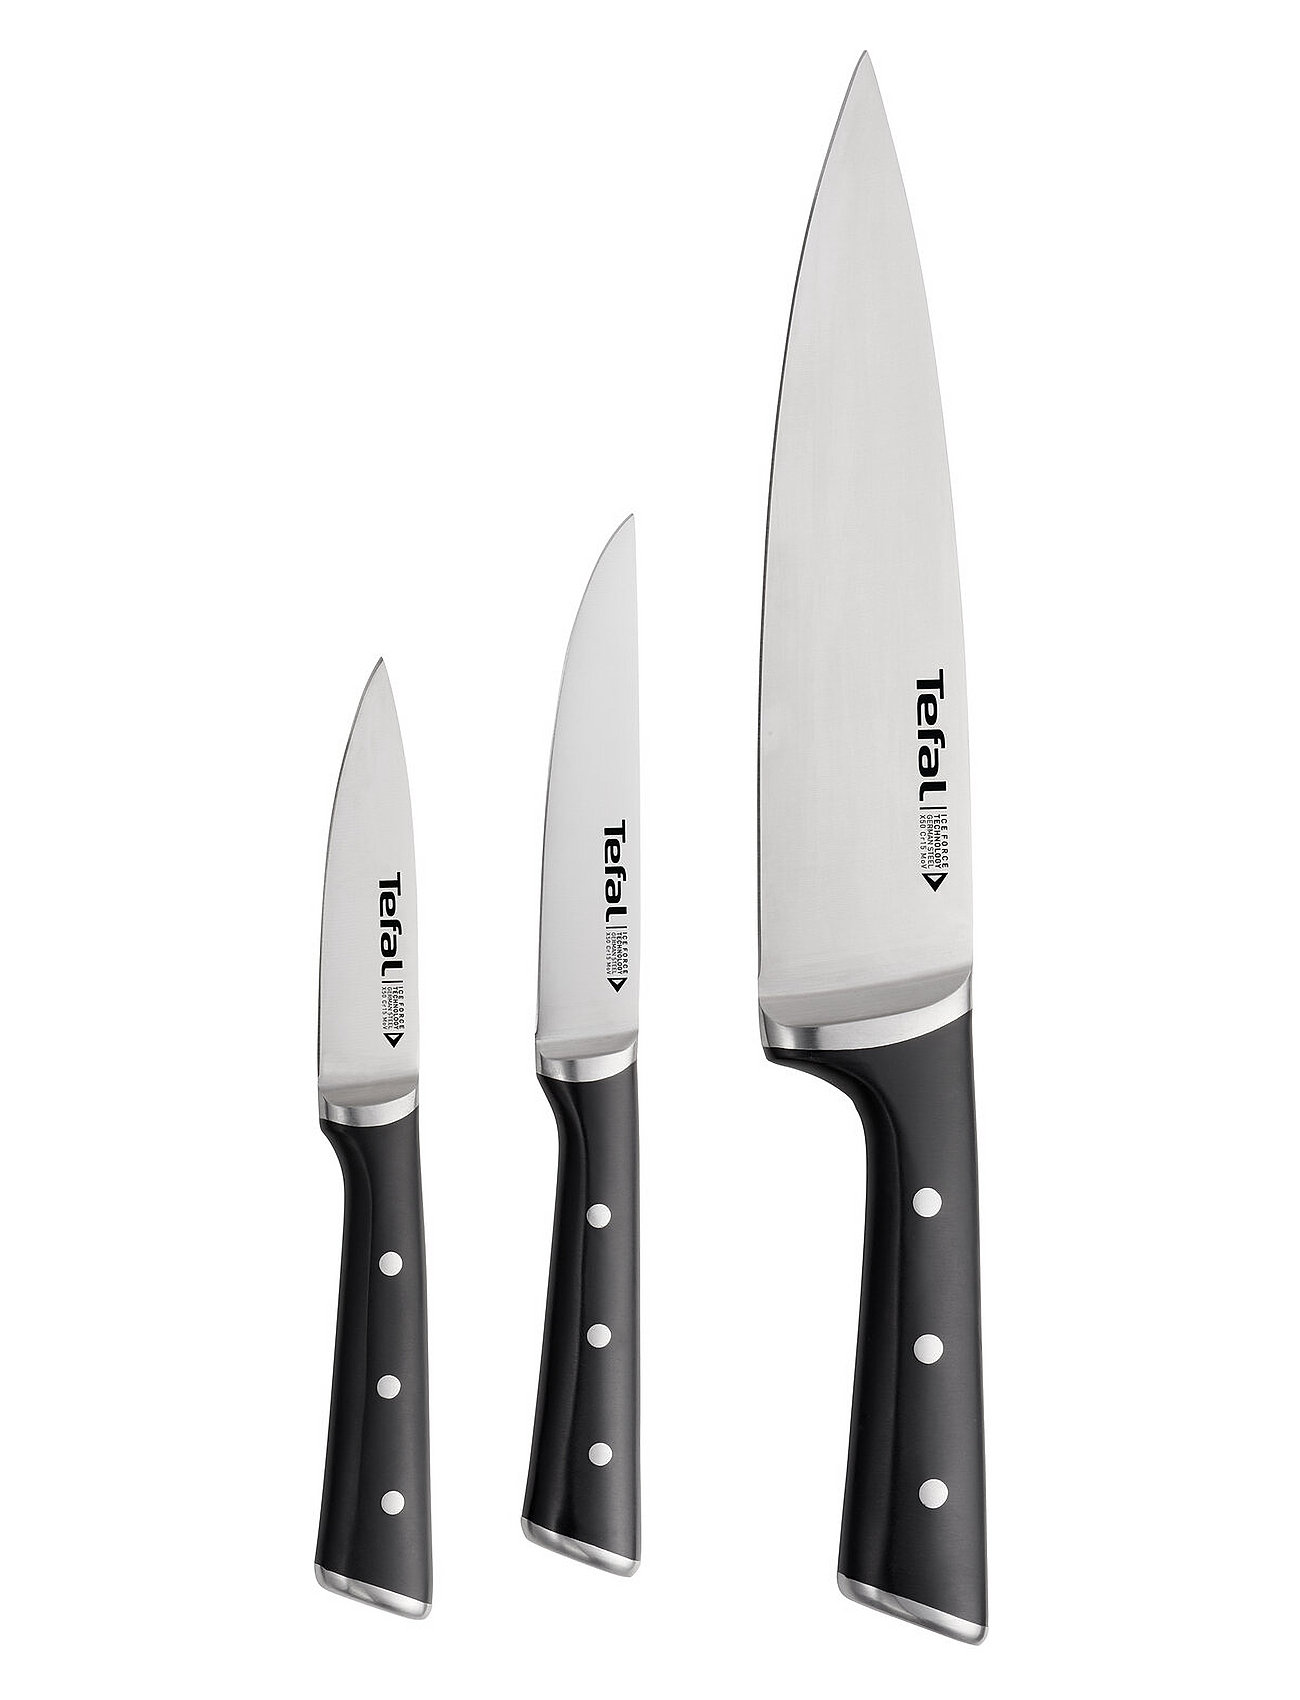 Tefal "Ice Force Set 3Pcs Pairing-, Utility-, Chef Knife Home Kitchen Knives & Accessories Sets Silver Tefal"